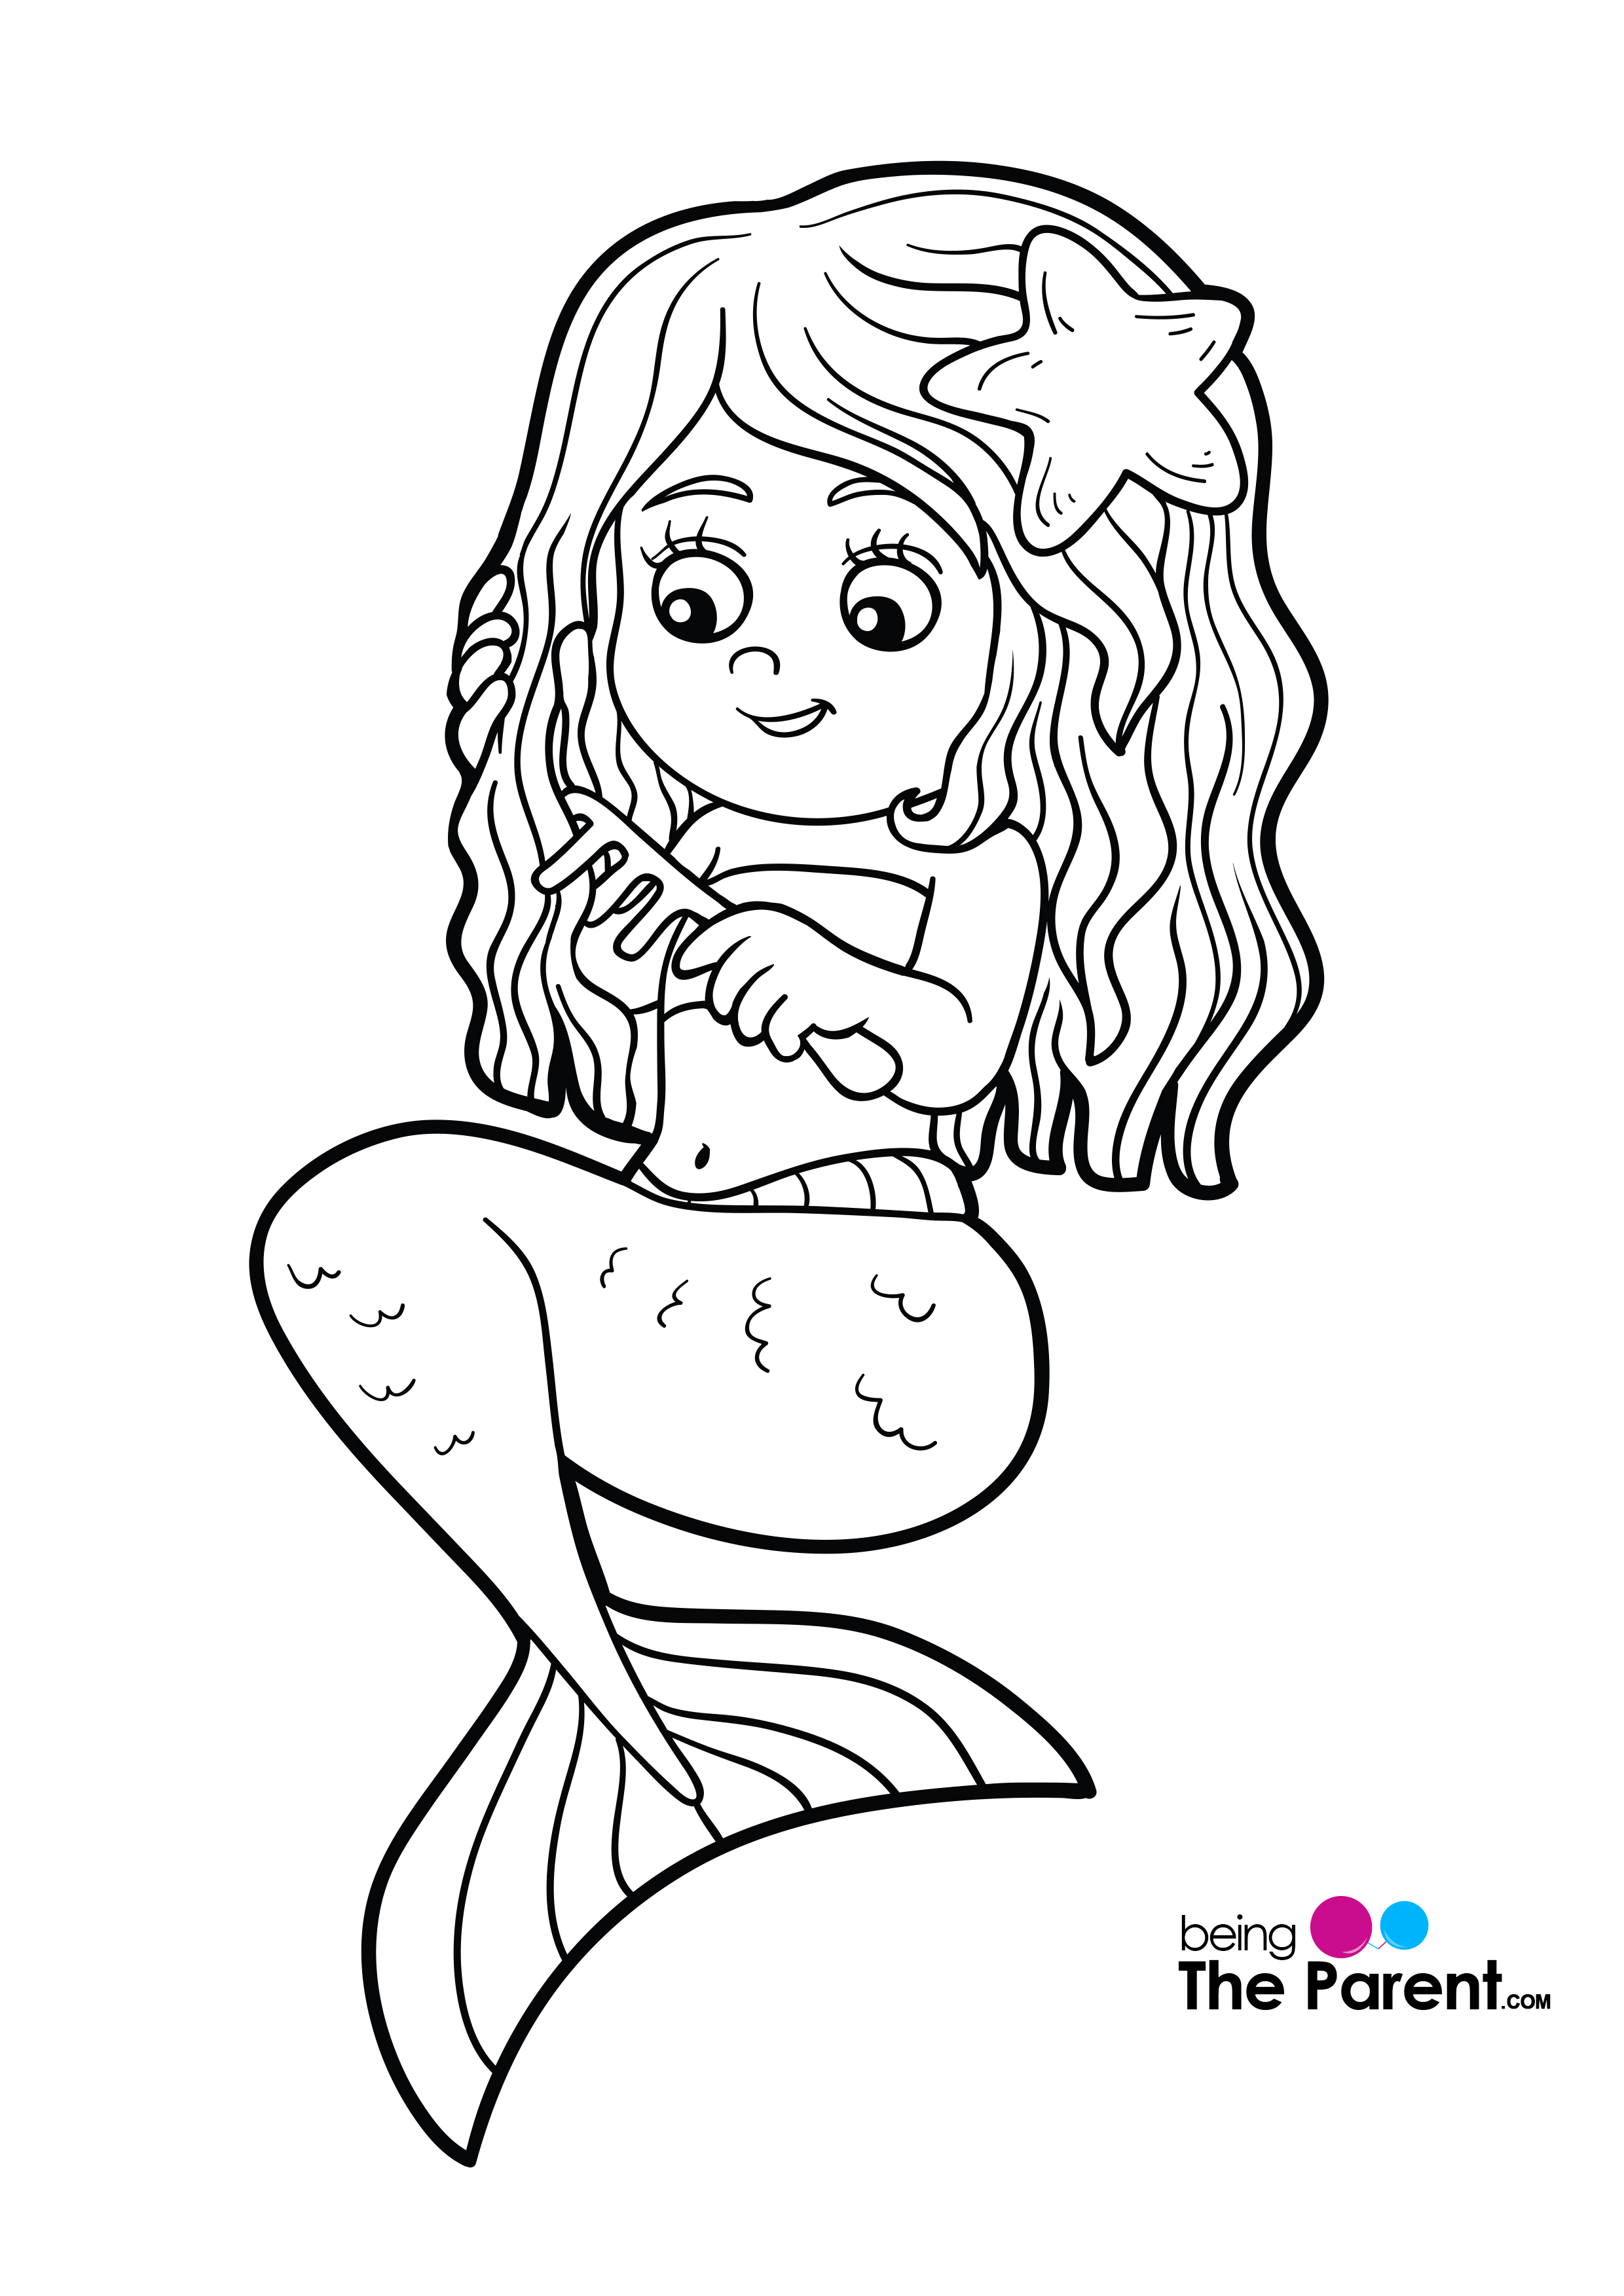 mermaid coloring page 10 easy mermaid coloring pages for your little ones coloring page mermaid 